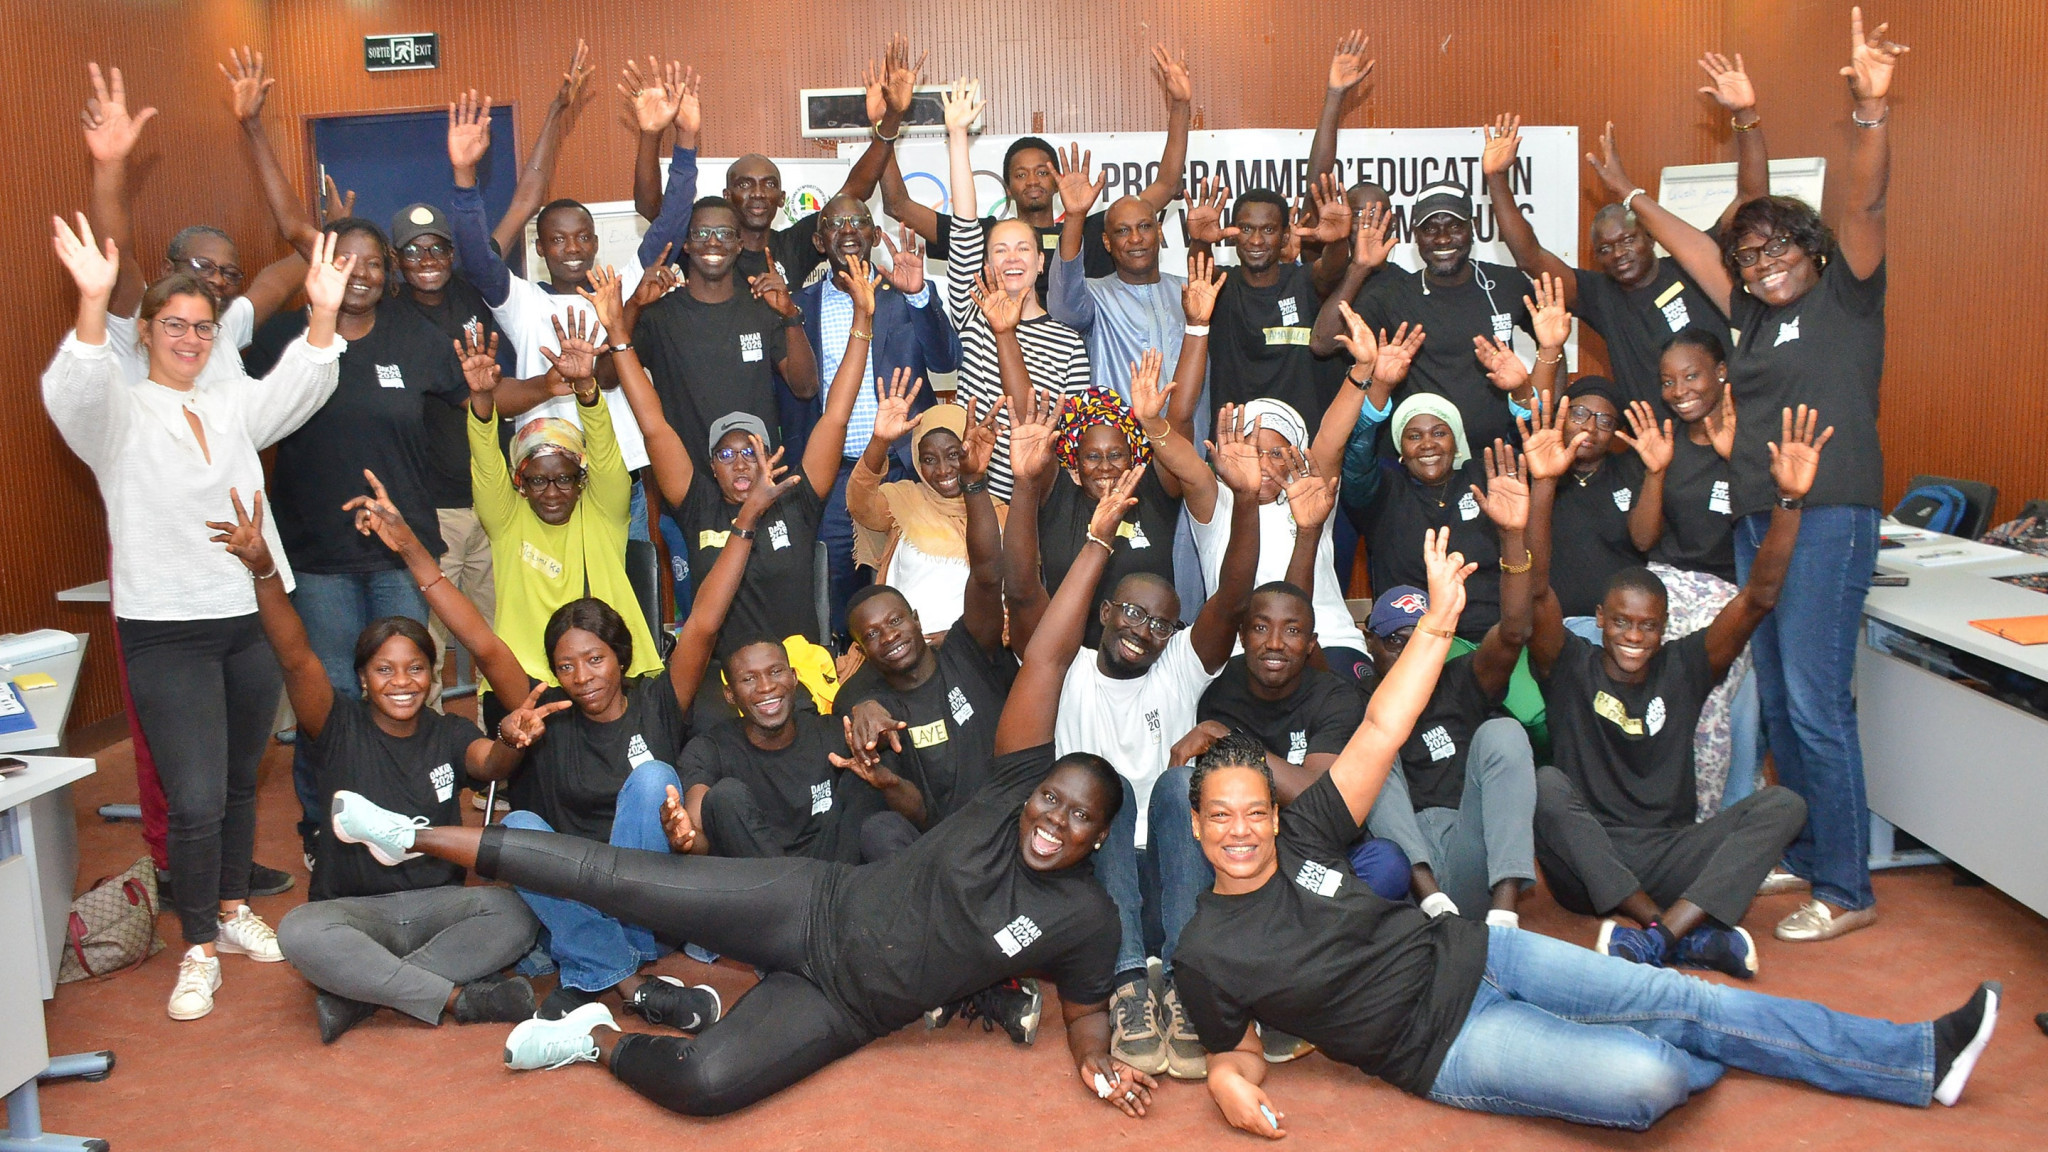 The first Olympic Values Education Programme initiatives for Dakar 2026 trained 60 participants on how to develop their own educational programmes ©Dakar 2026